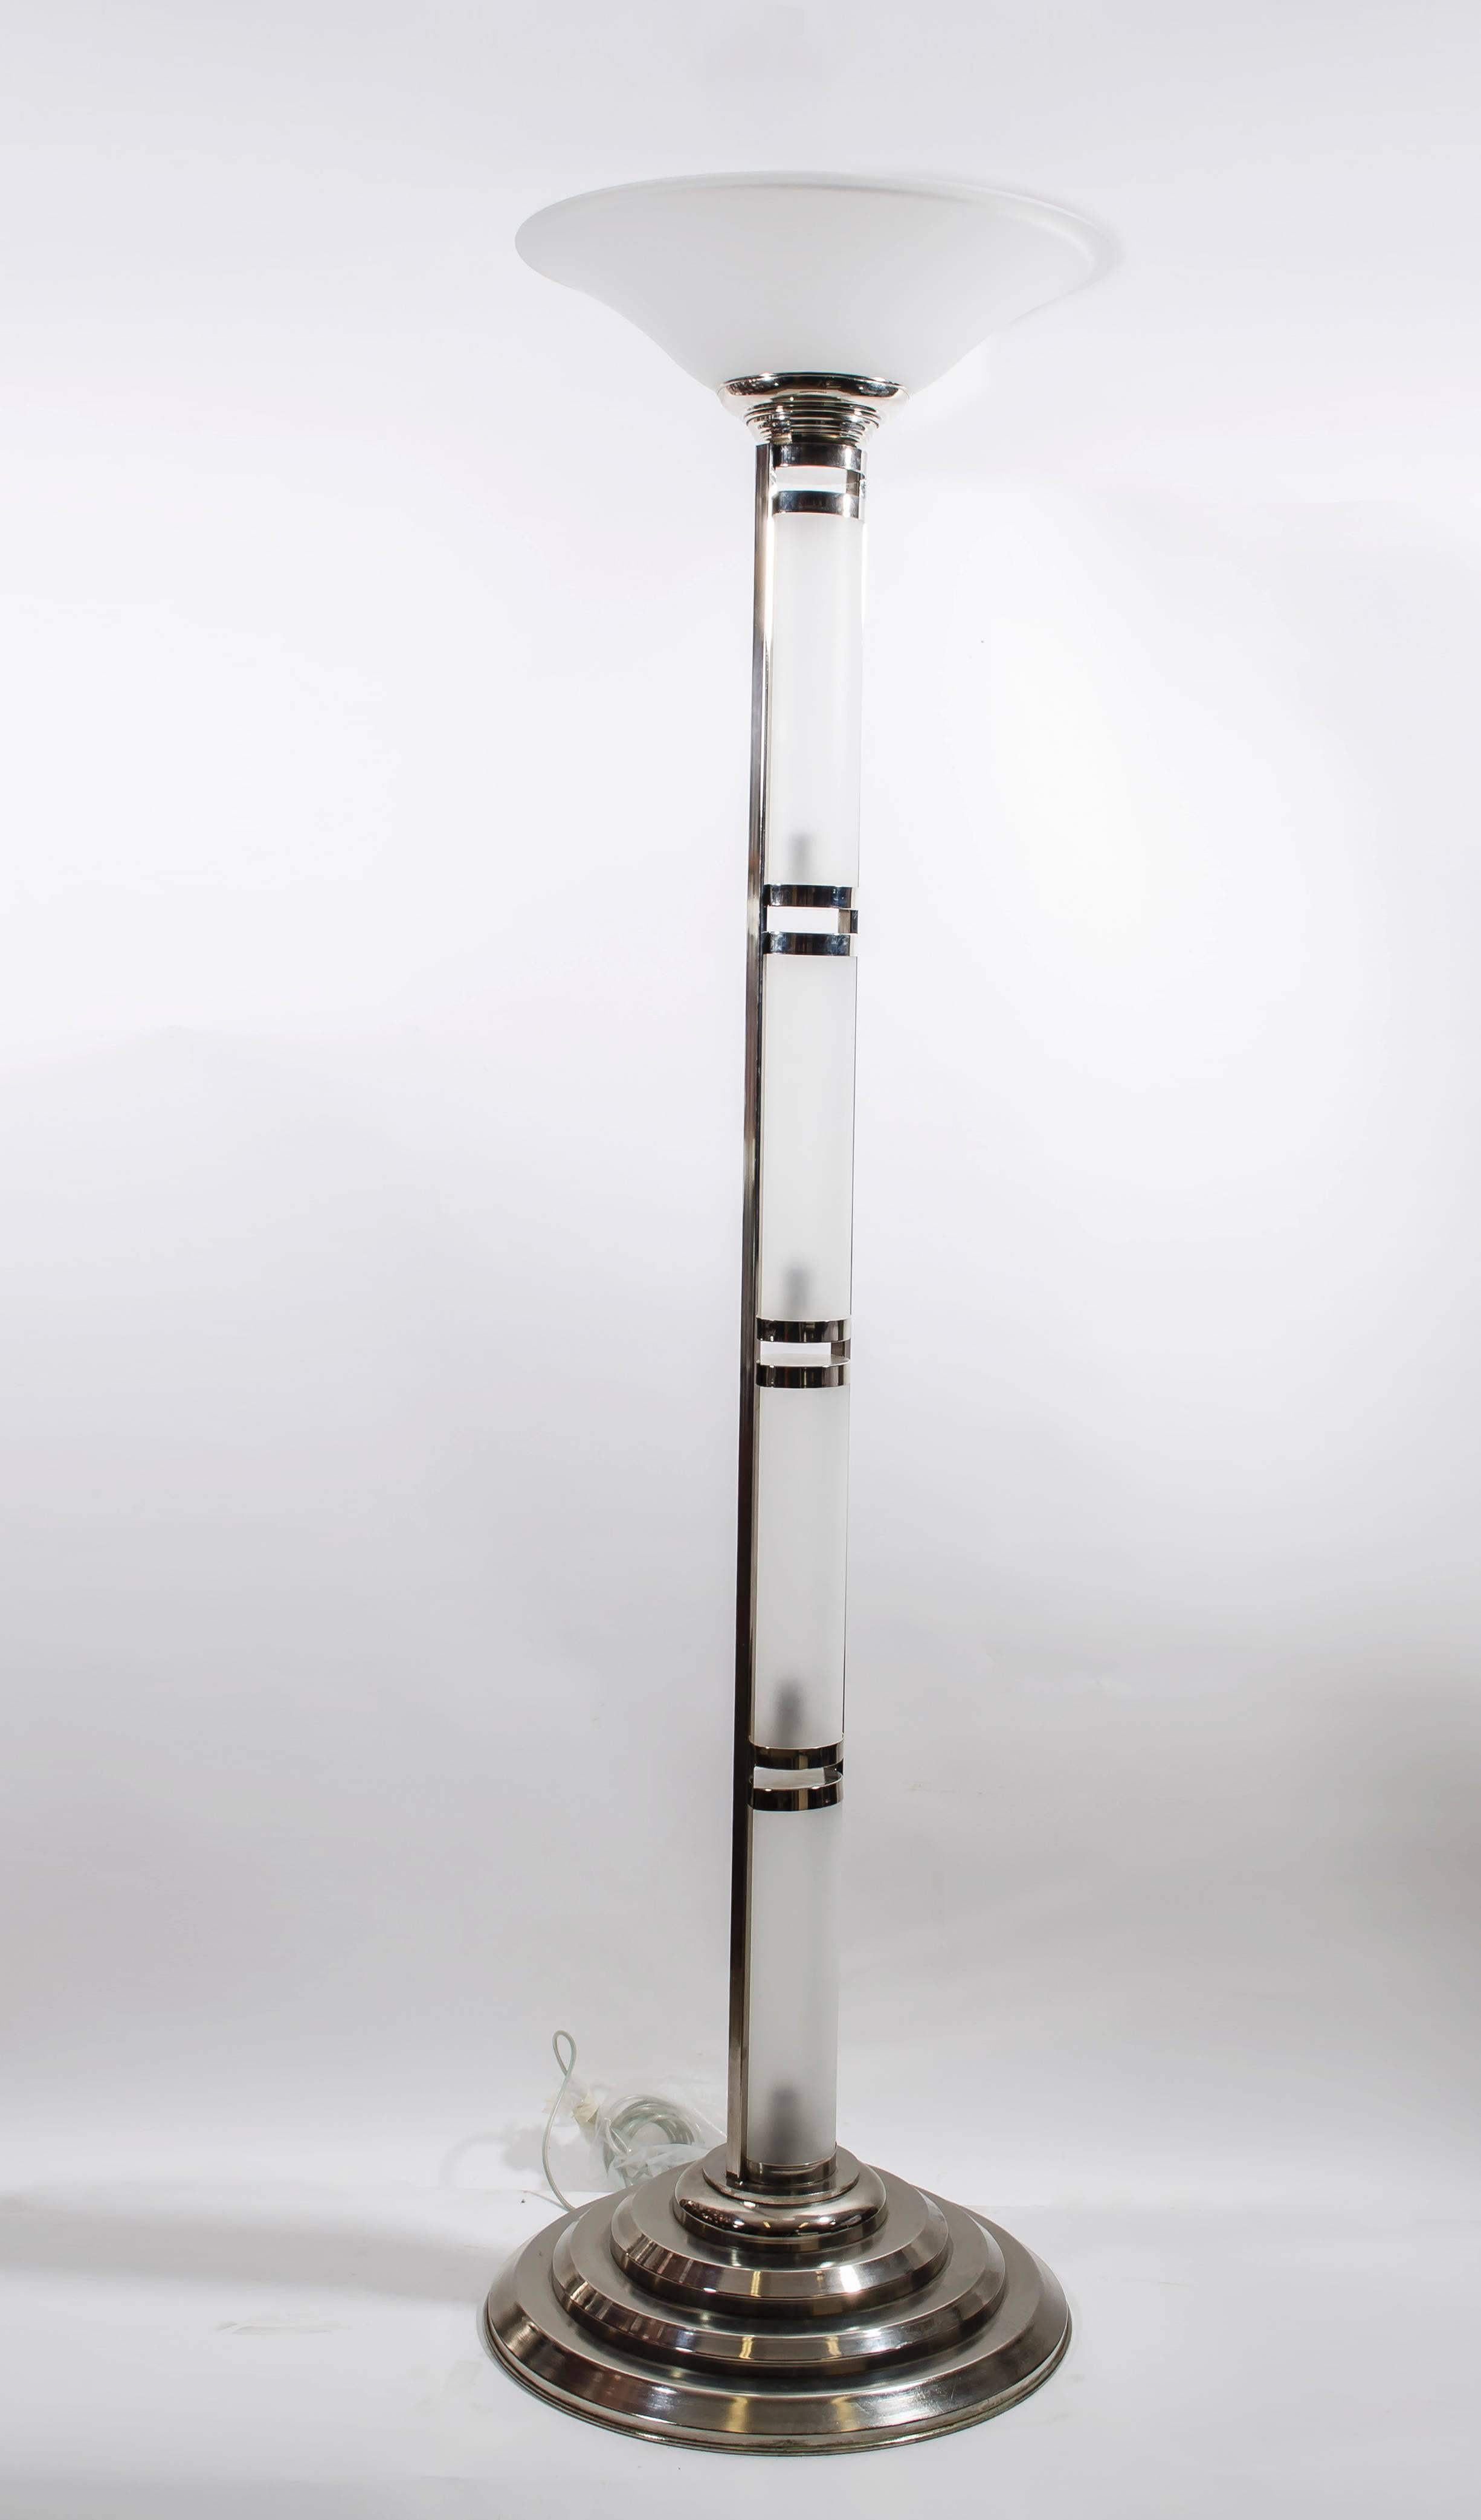 A very nice pair of Murano glass floor lamps, sandblasted cylinders and shade on chromium-plated stem.

Check other items in our storefront page.